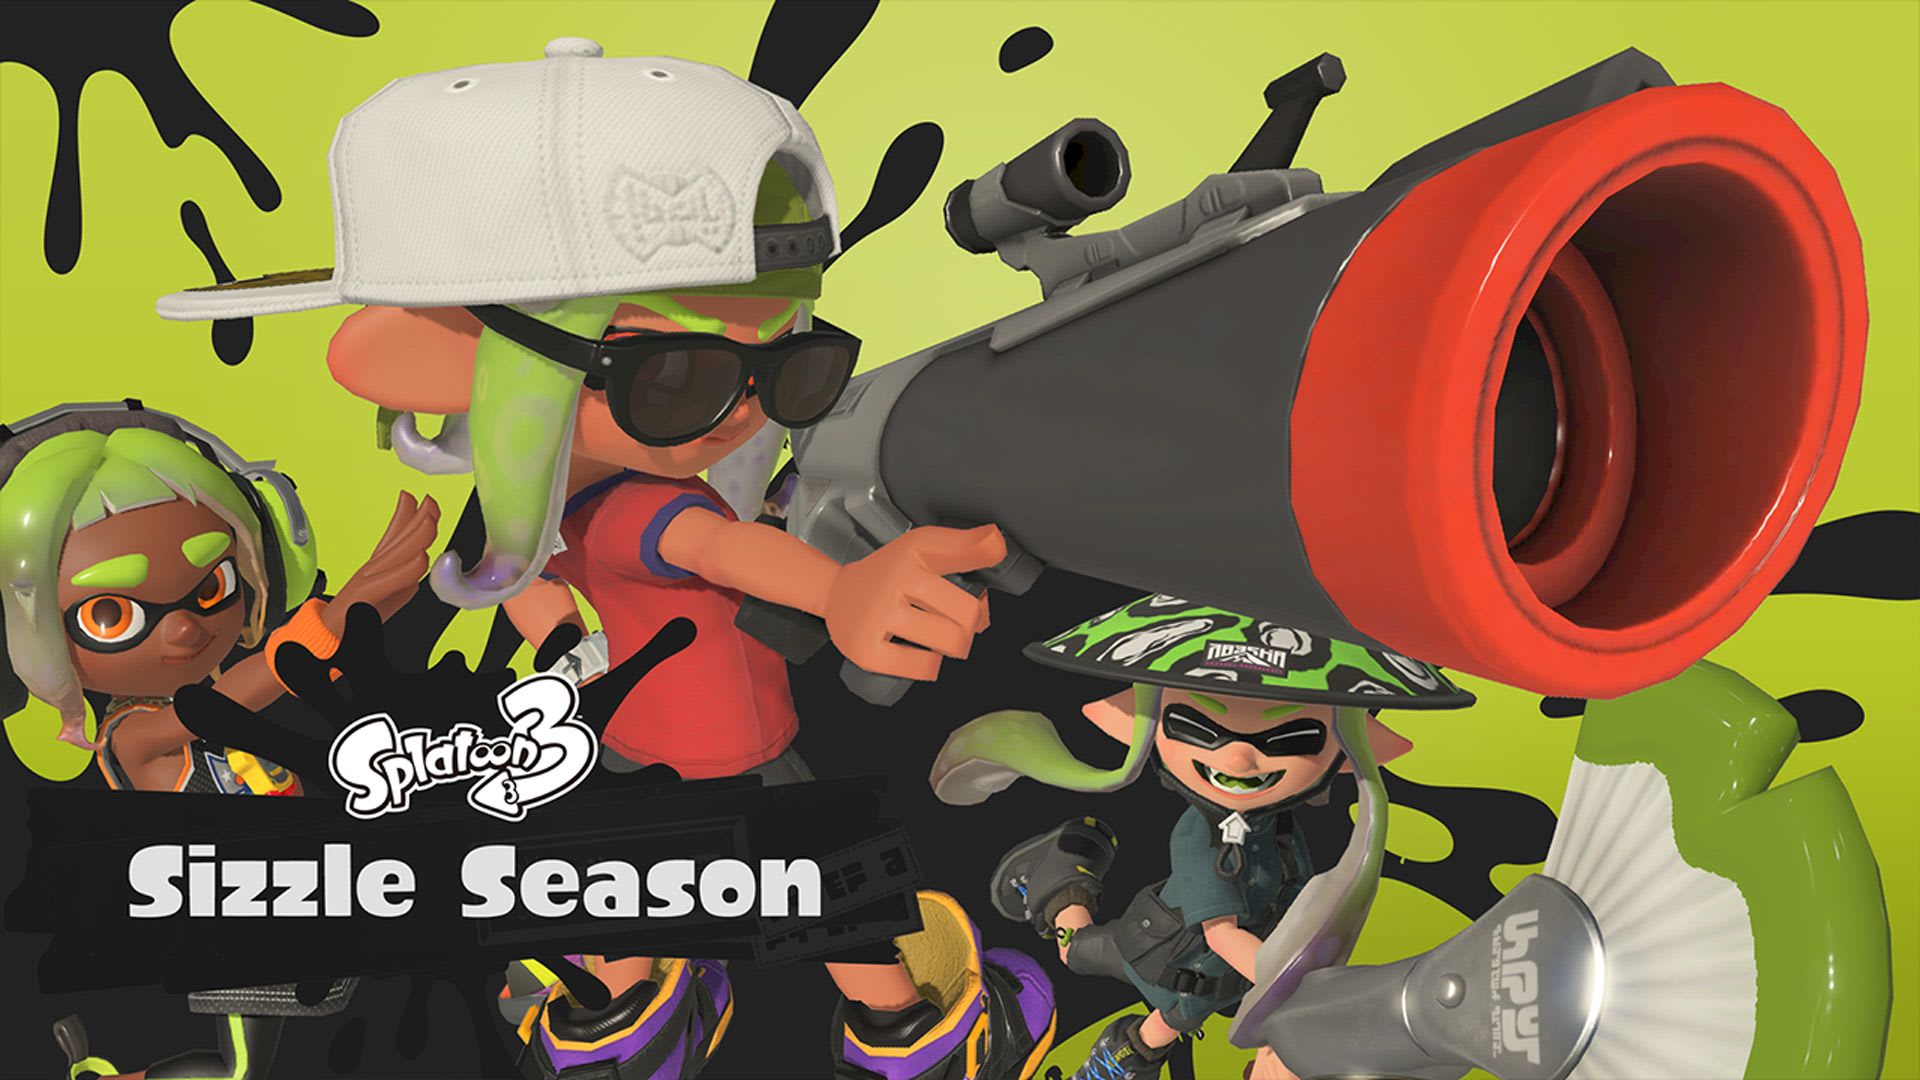 Splatoon 3 Sizzle Season adds new weapons, stages, challenges, and more! Hero